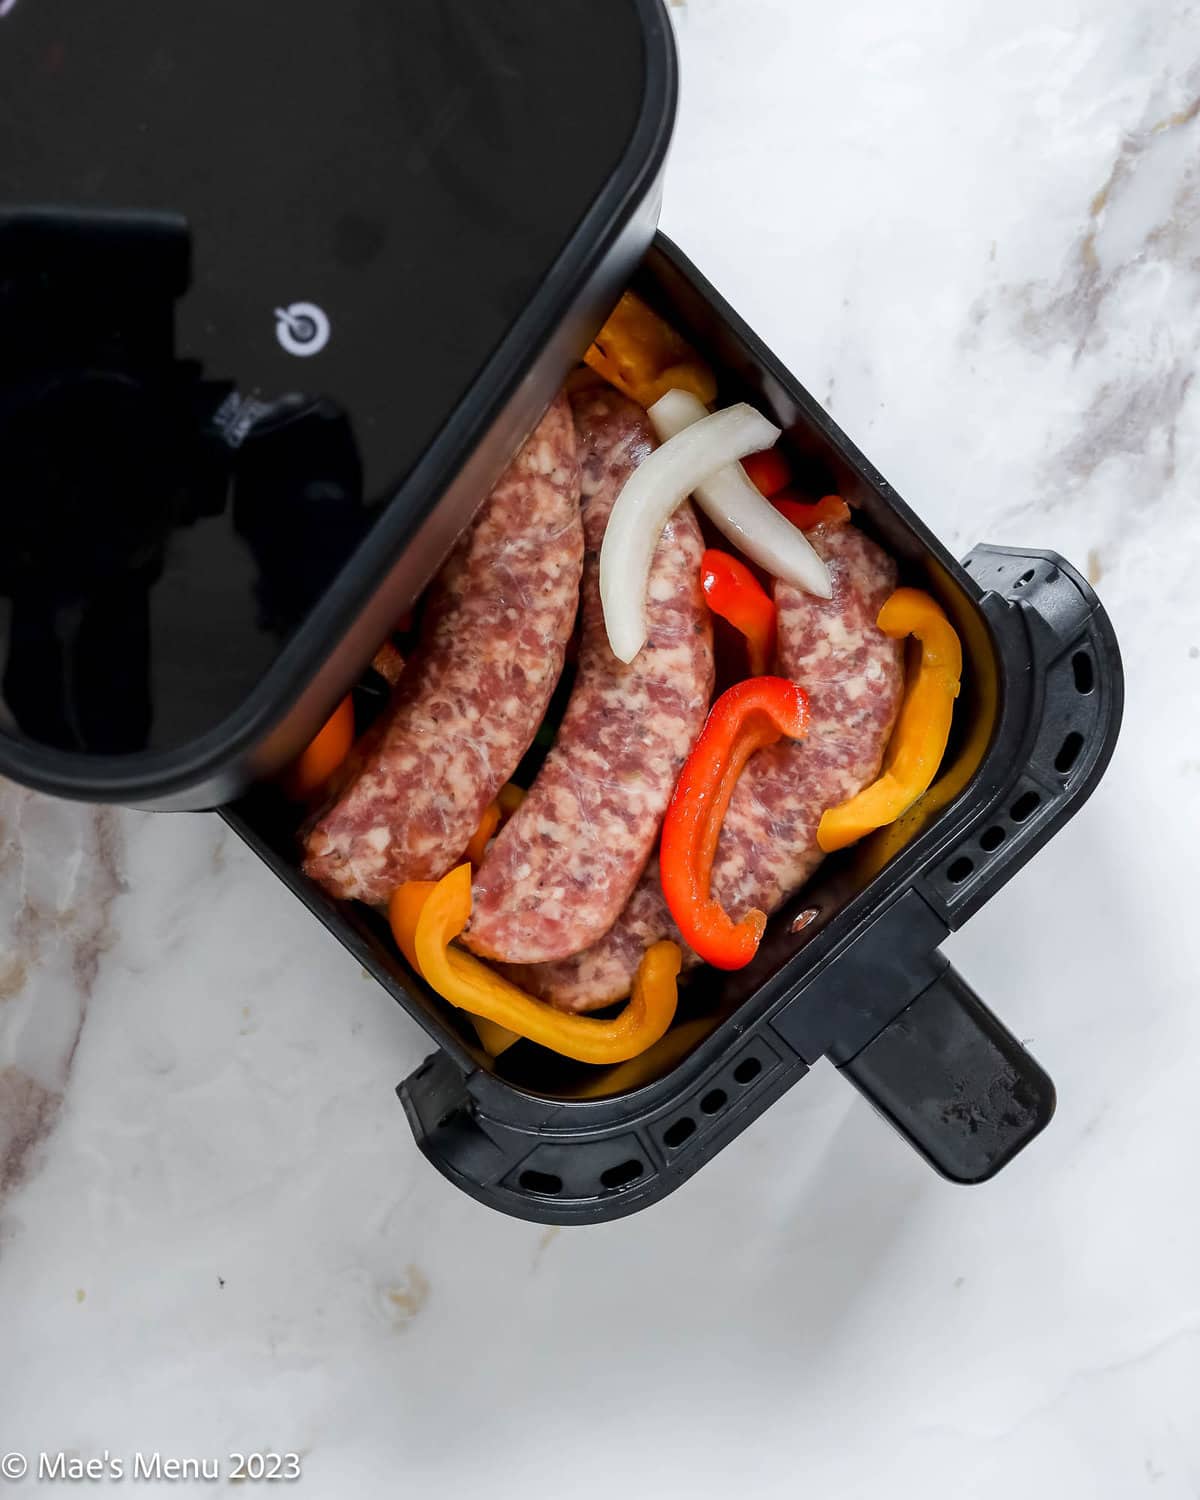 Italian sausage, peppers, and onions in the air fryer basket.